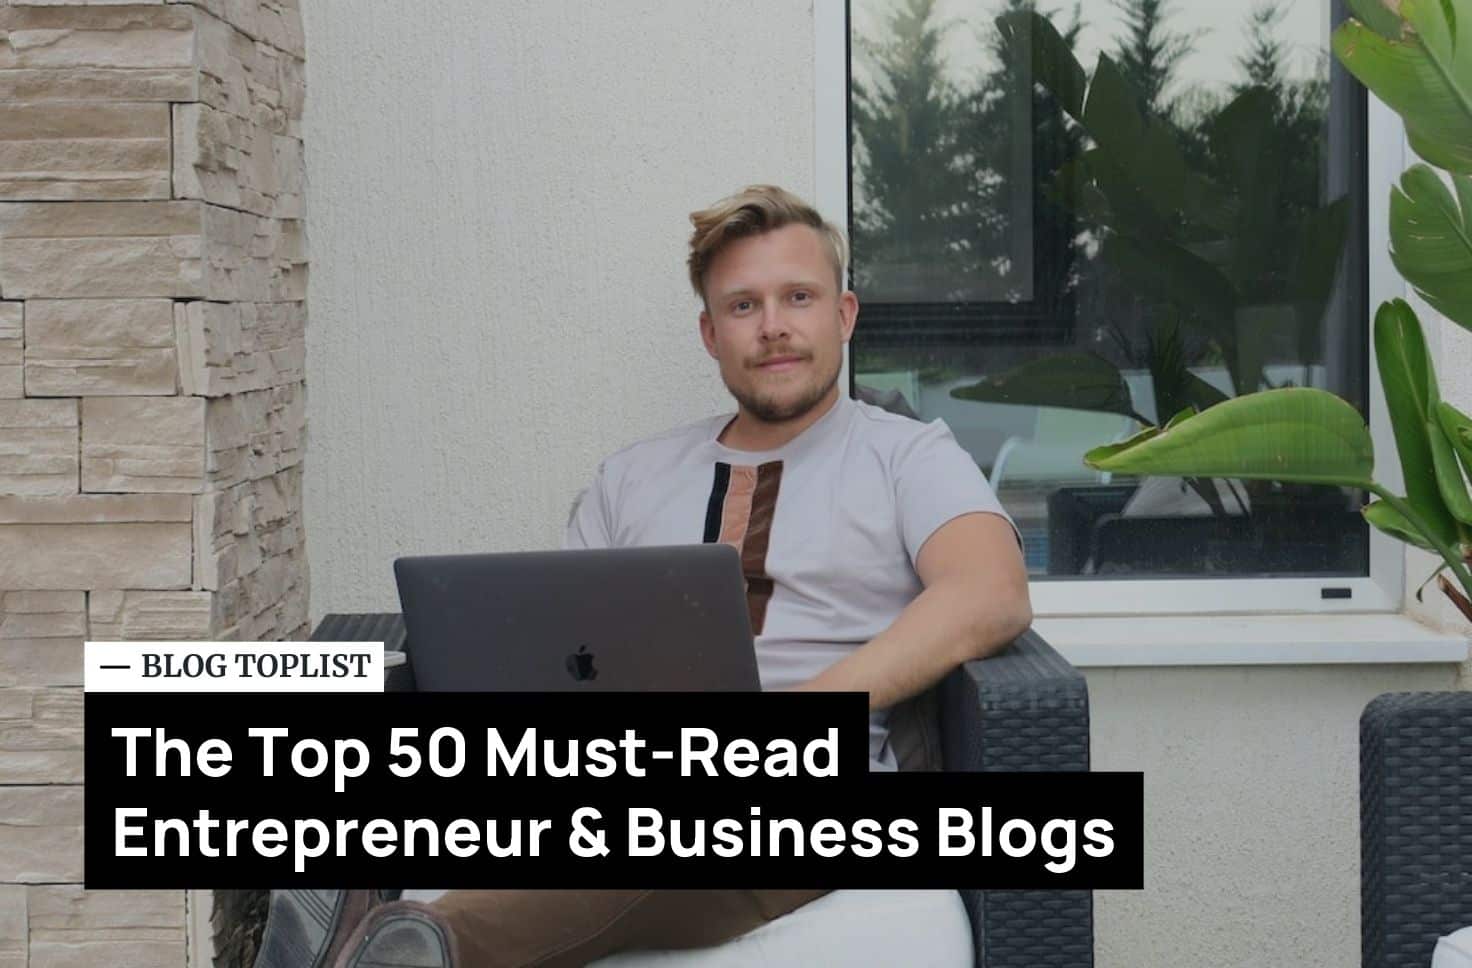 Is Your Business Book-Worthy? An Eye-Opening Insight for Every Entrepreneur